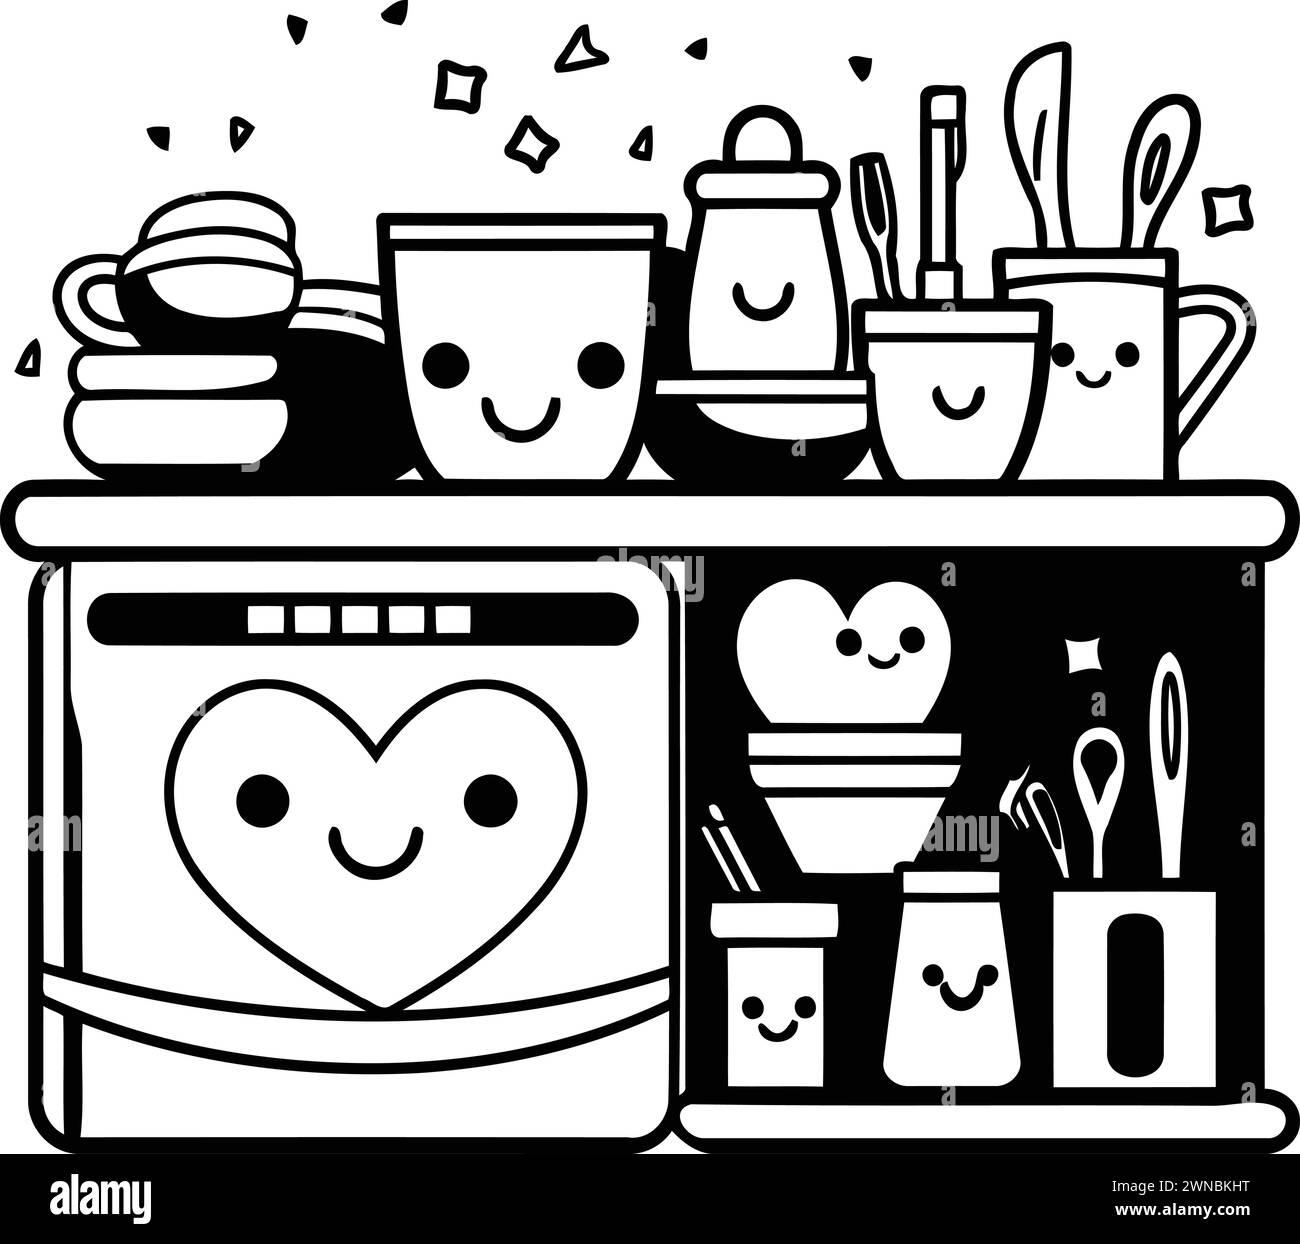 Dishwasher and kitchen with food. Black and white vector illustration. Stock Vector